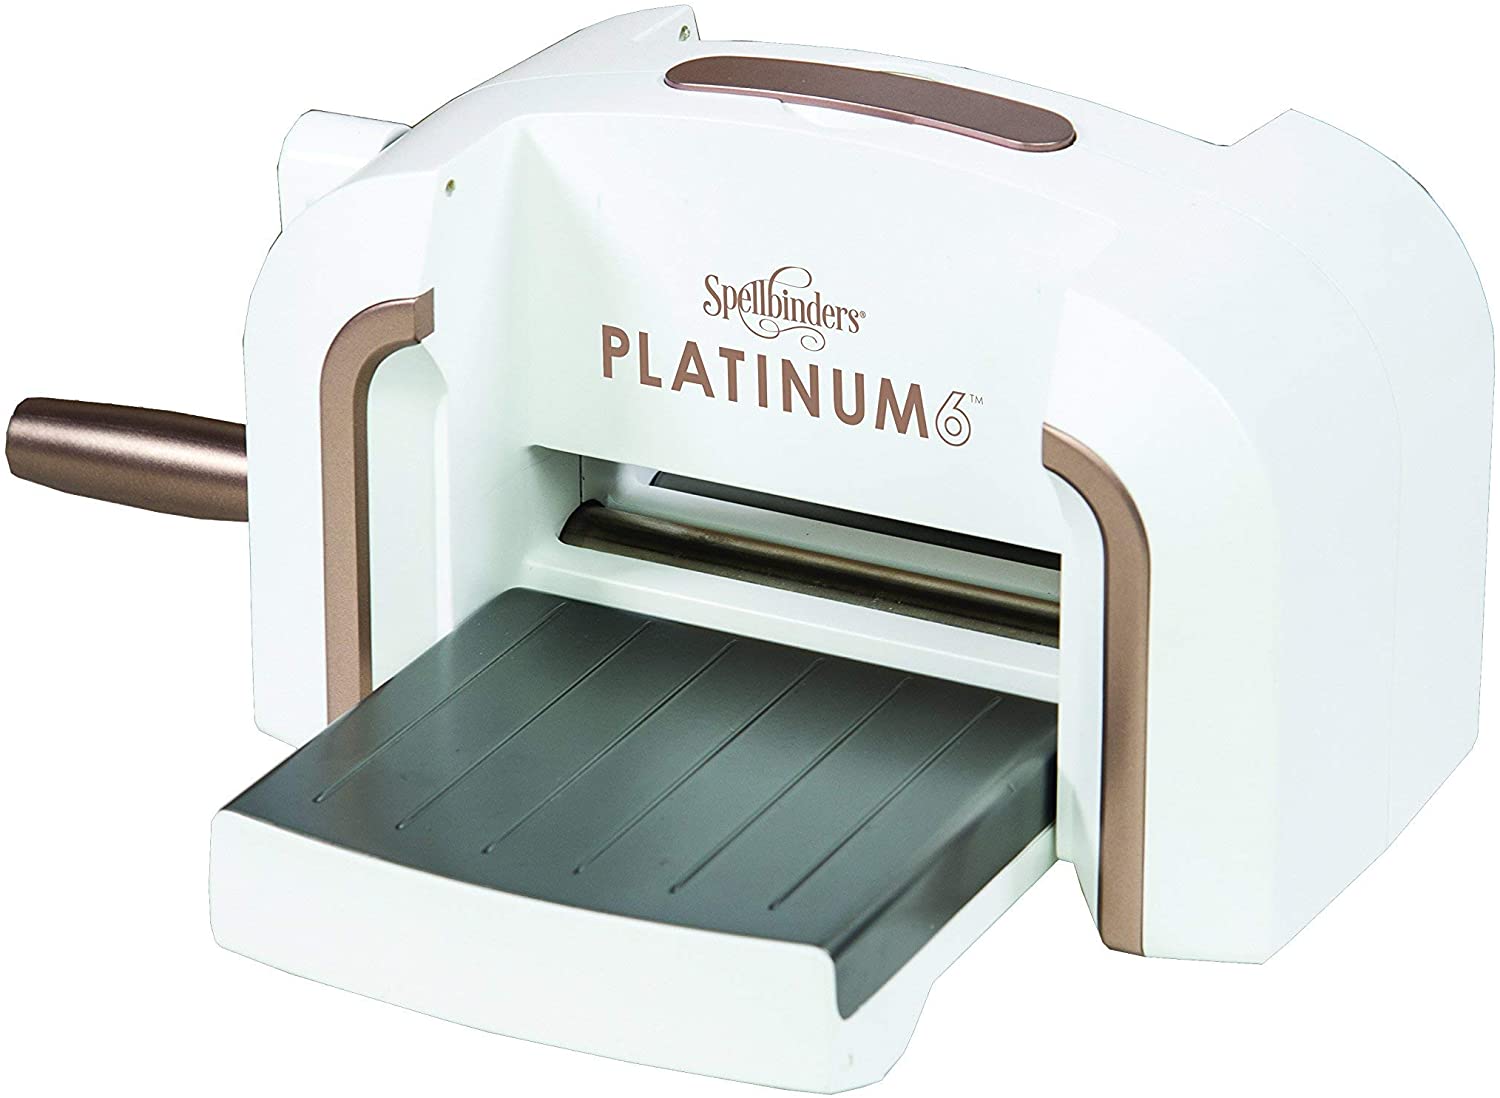 Best embossing and die cutting machine for cutting multiple layers at once- Spellbinders Platinum